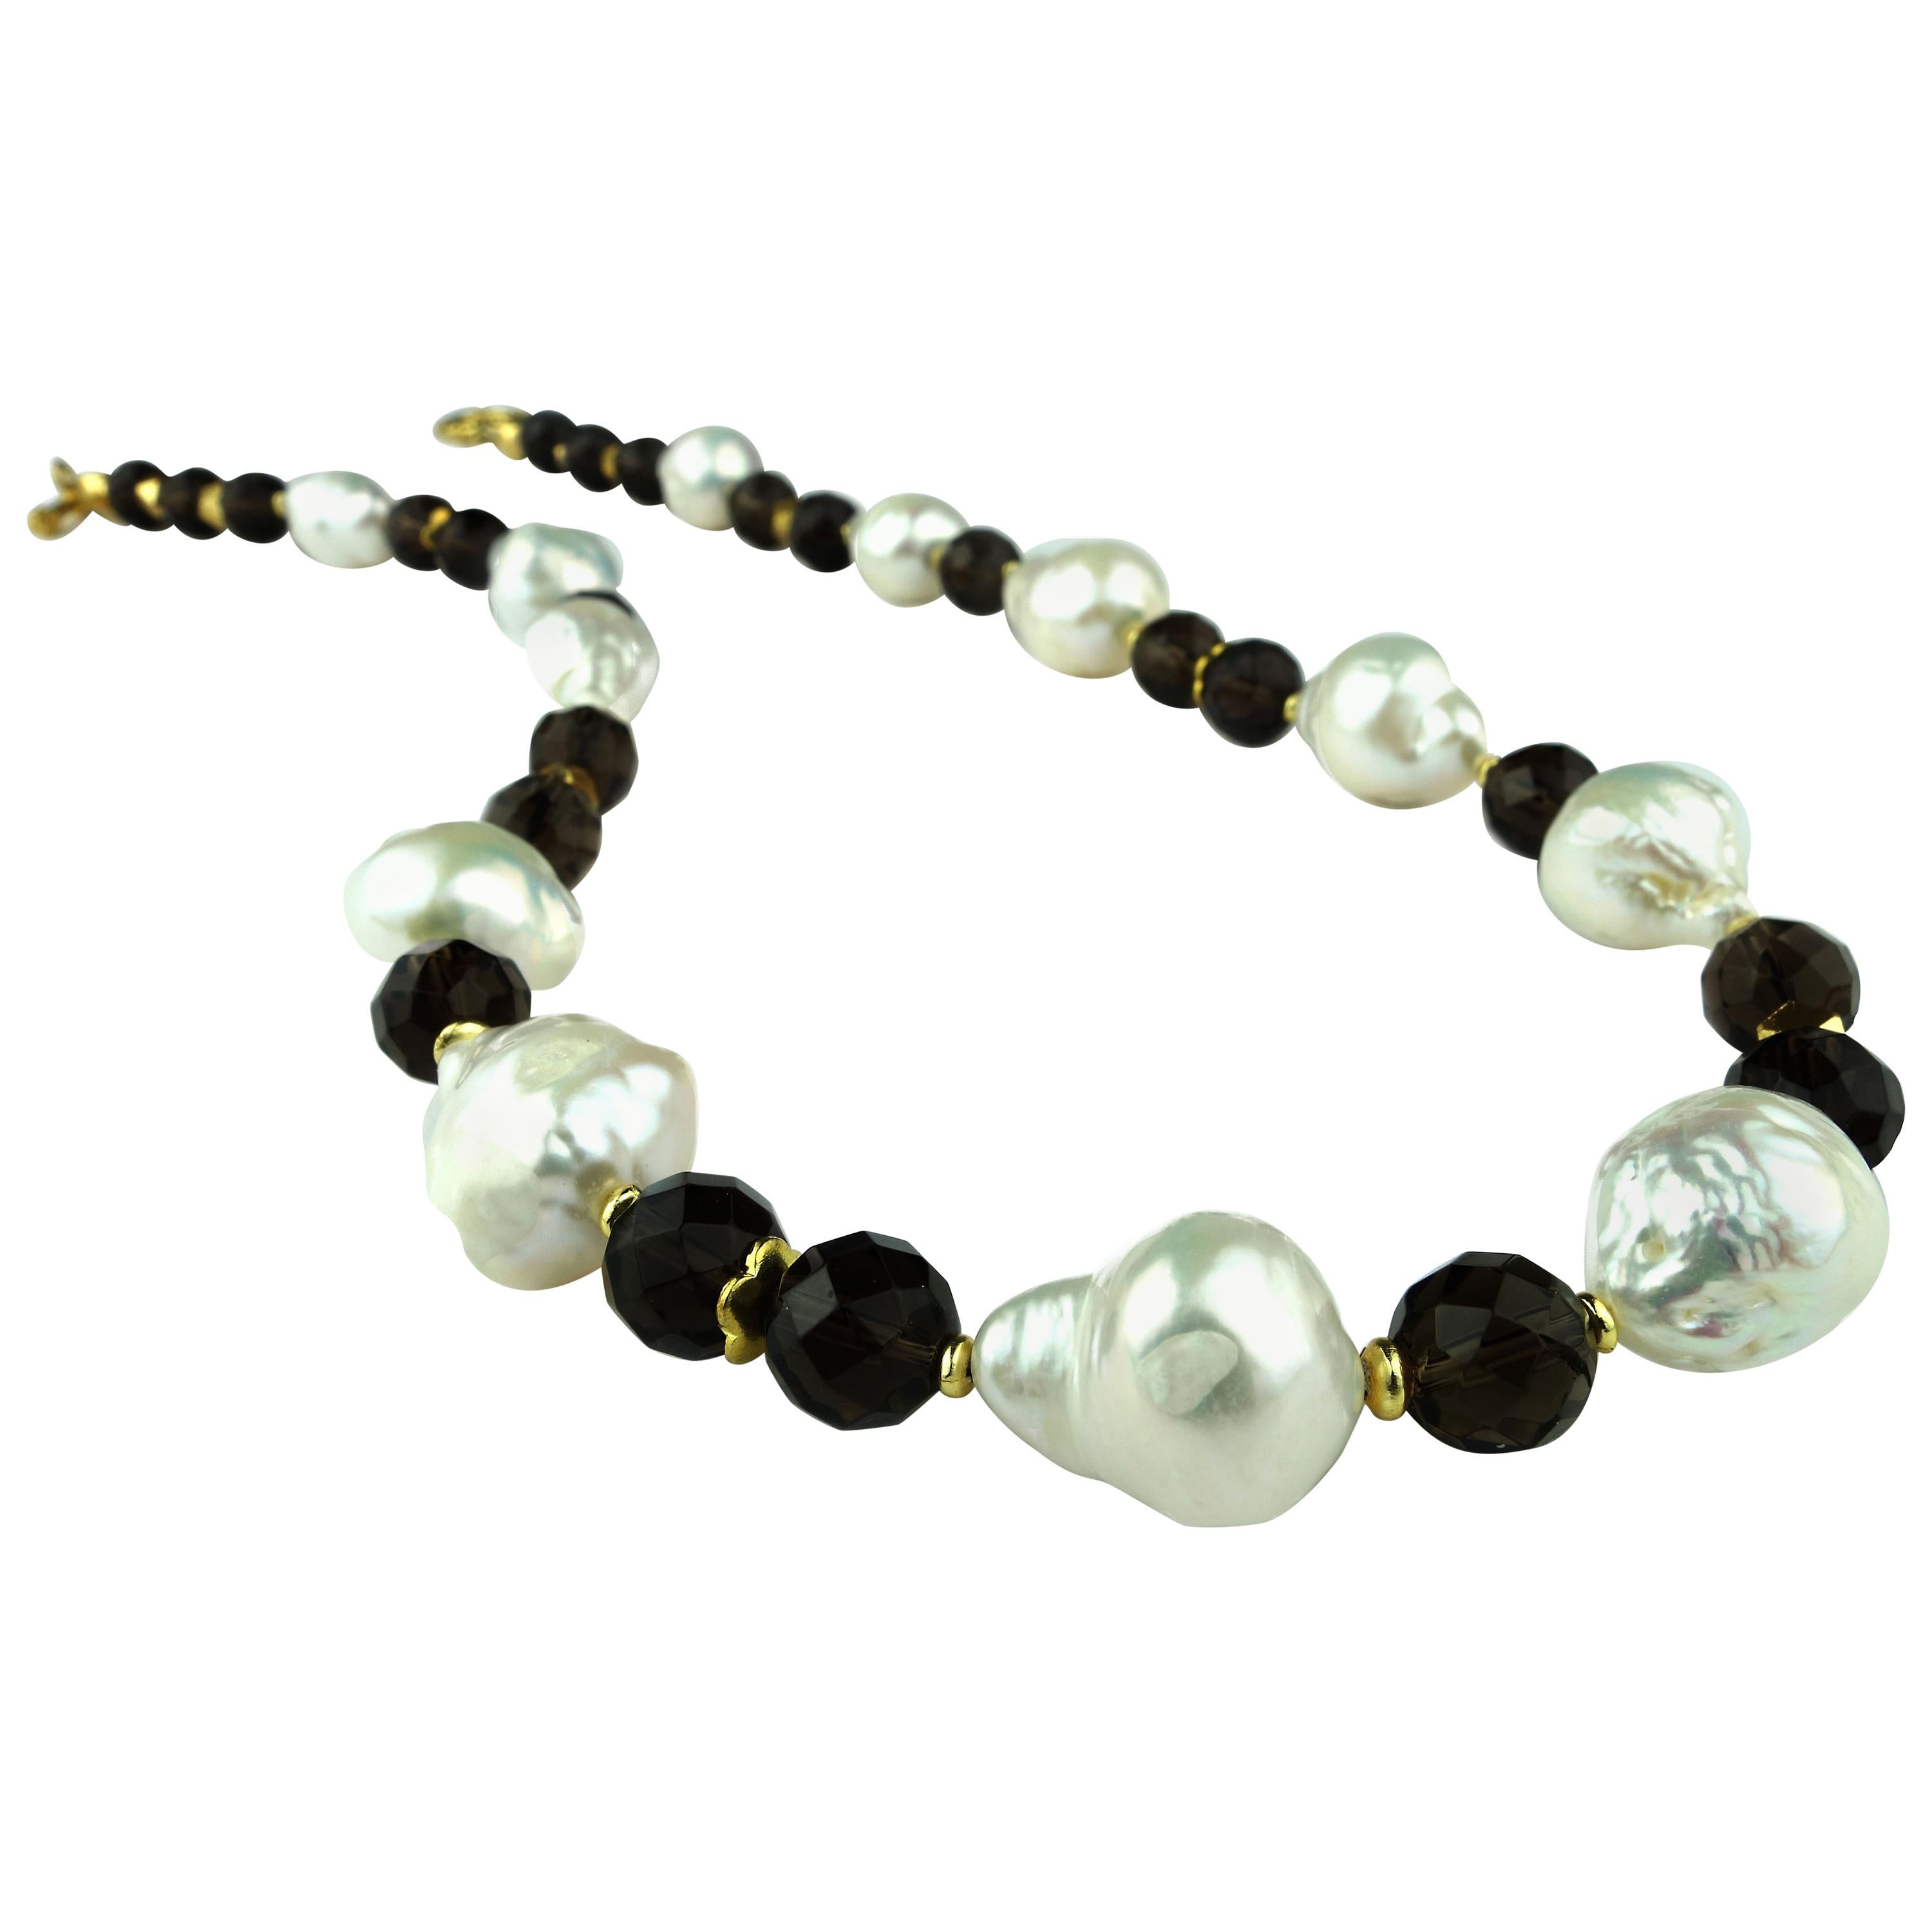 Own the jewelry you wish for

Custom made, striking necklace of white Freshwater Pearls ﻿and round faceted Smoky Quartz.  Each of these Freshwater Pearls is unique in shape and approximately 15mm.  The round faceted Smoky Quartz of 9mm is accented